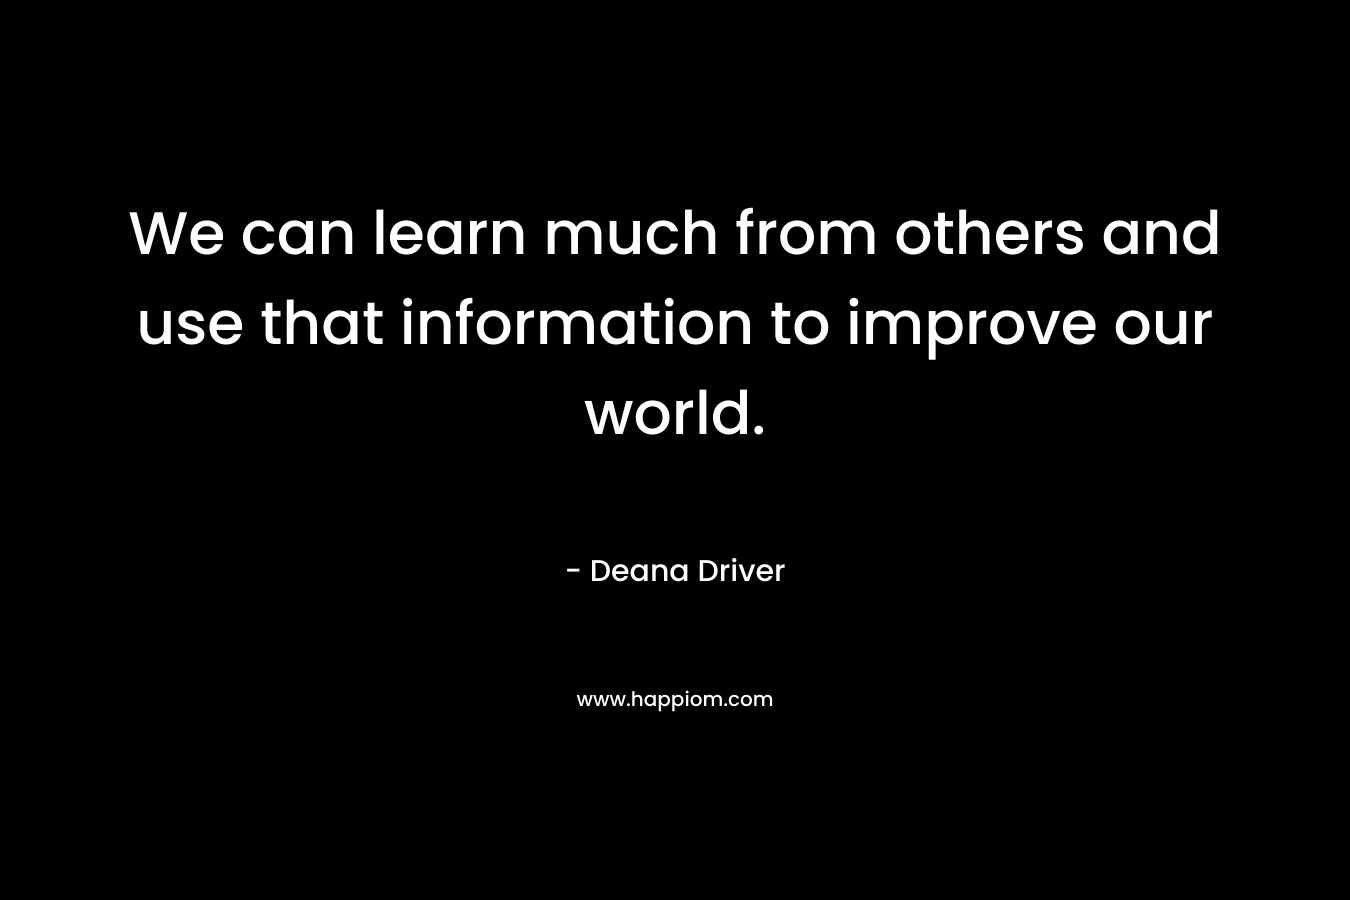 We can learn much from others and use that information to improve our world. – Deana Driver